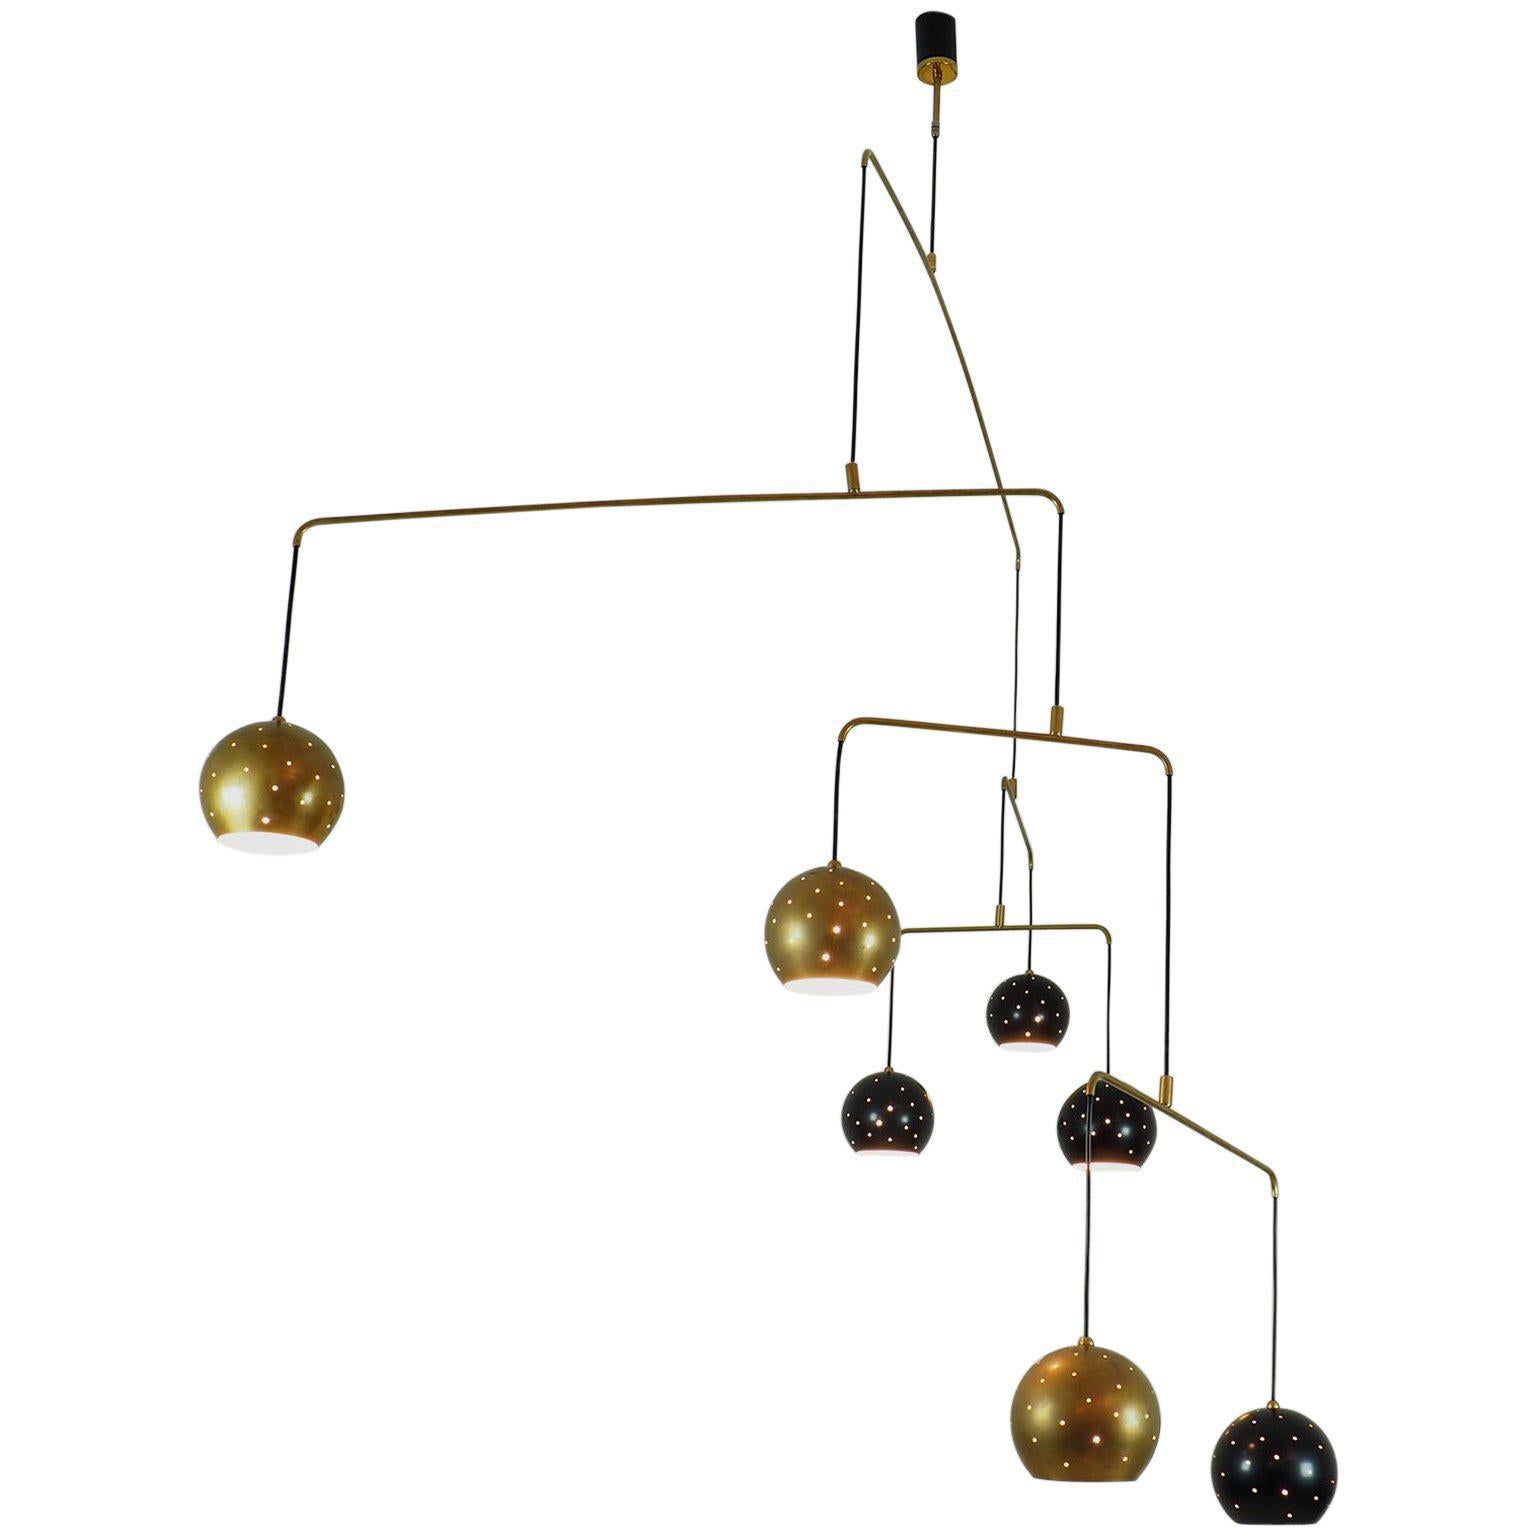 Original Italian brass mobile chandelier manufactured in a very 7 small handcraft production in Milano, 20th century
Large, magic and poetical mobile chandelier with brass and black suspending spheres, it can moves with the flow of air.
Wholly in